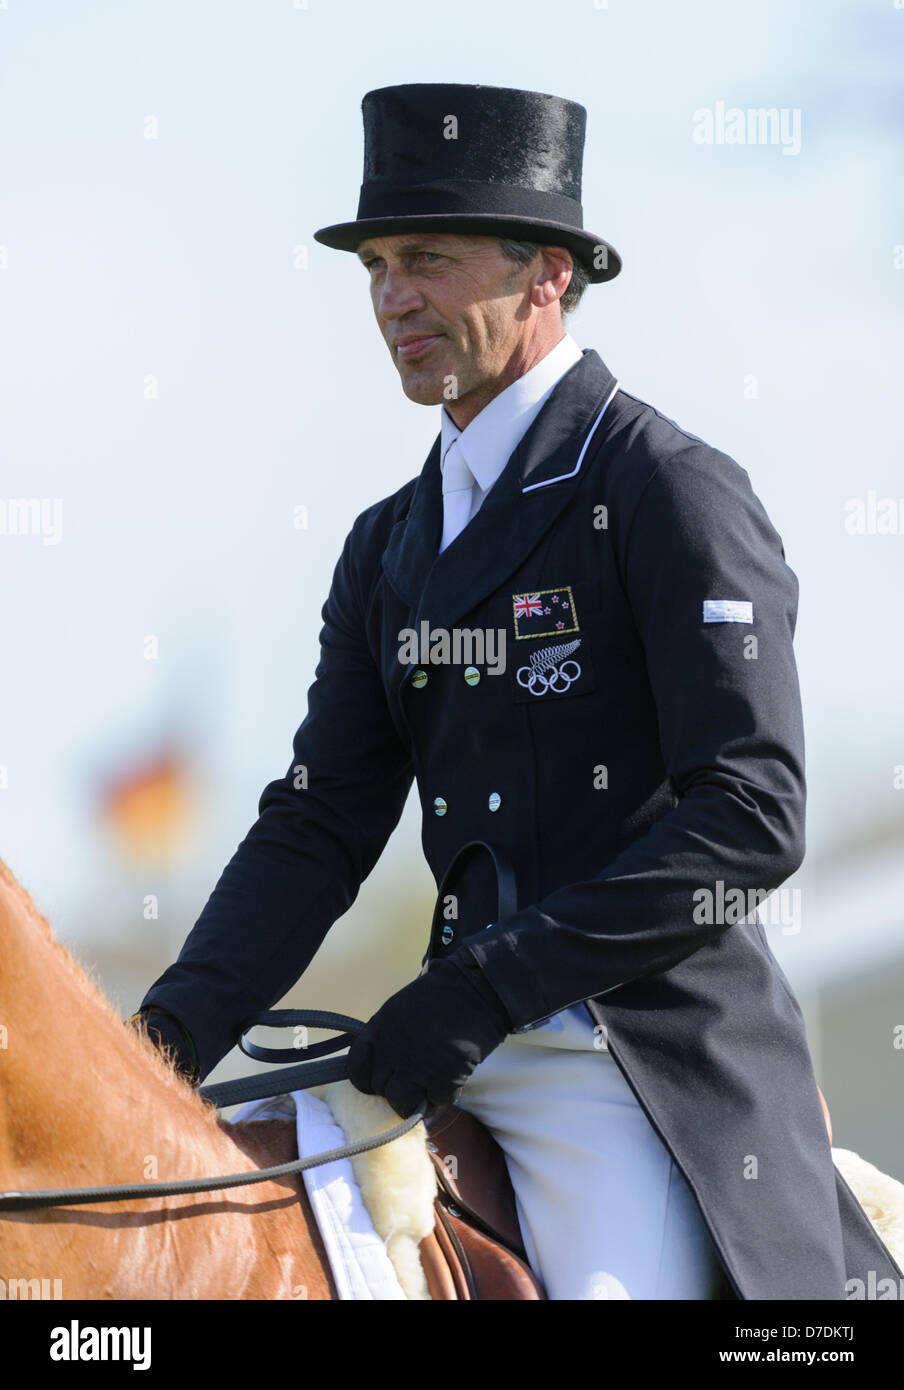 Badminton, UK. 4th May, 2013. Andrew Nicholson and NEREO lie in sixth place as they chase the coveted Rolex Grand Slam and $350,000 - The Dressage phase of the Mitsubishi Motors Badminton Horse Trials, Saturday May 4th 2013 Stock Photo